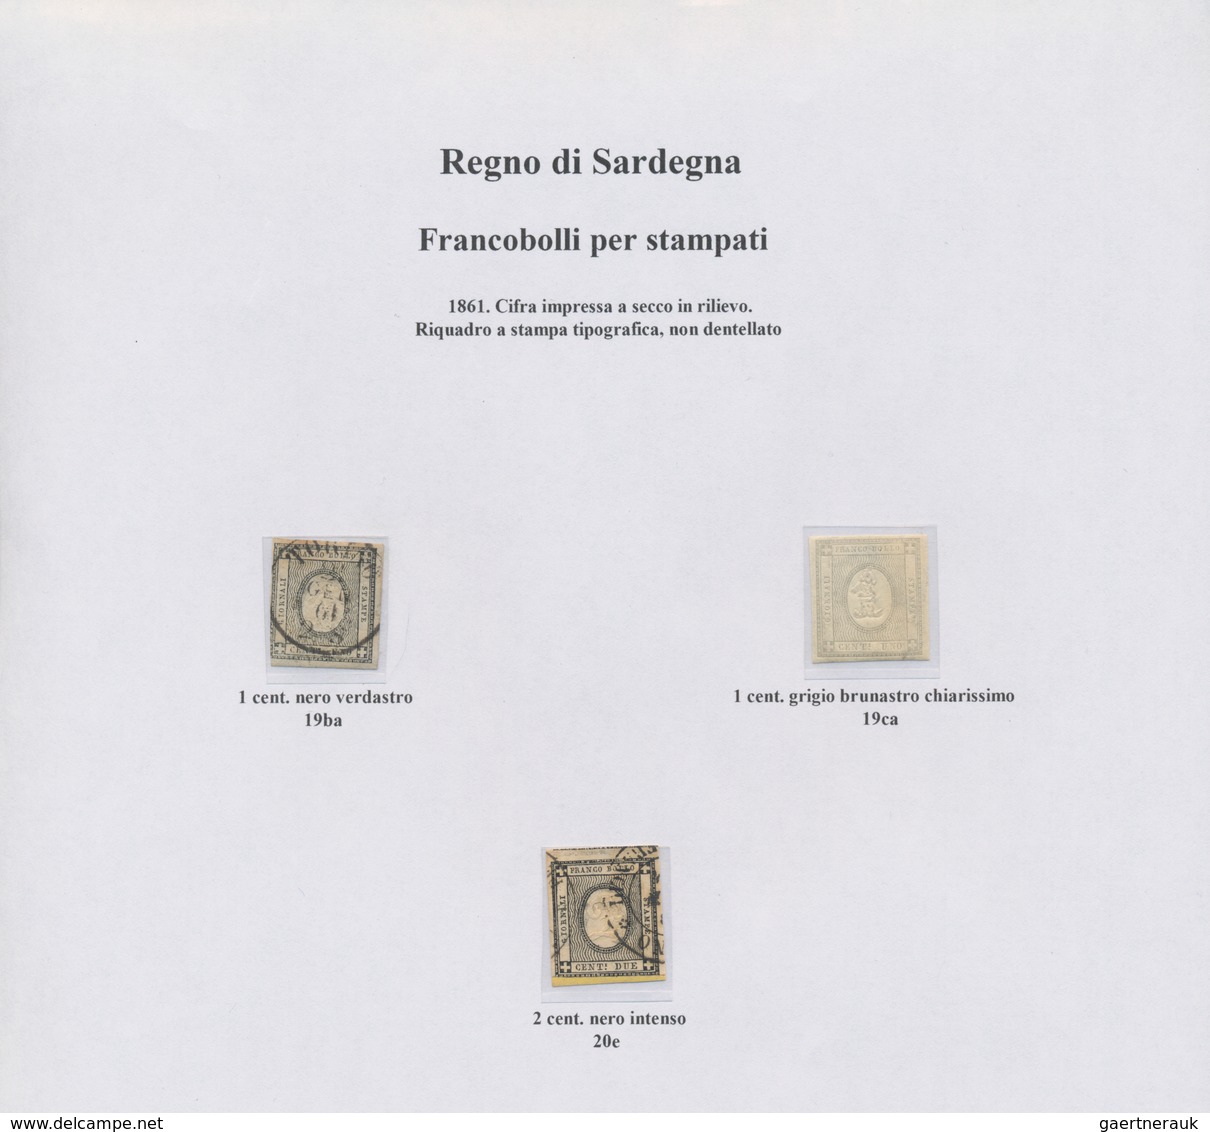 Italien - Altitalienische Staaten: Sardinien: 1851/1863, mainly used collection of 179 stamps on wri